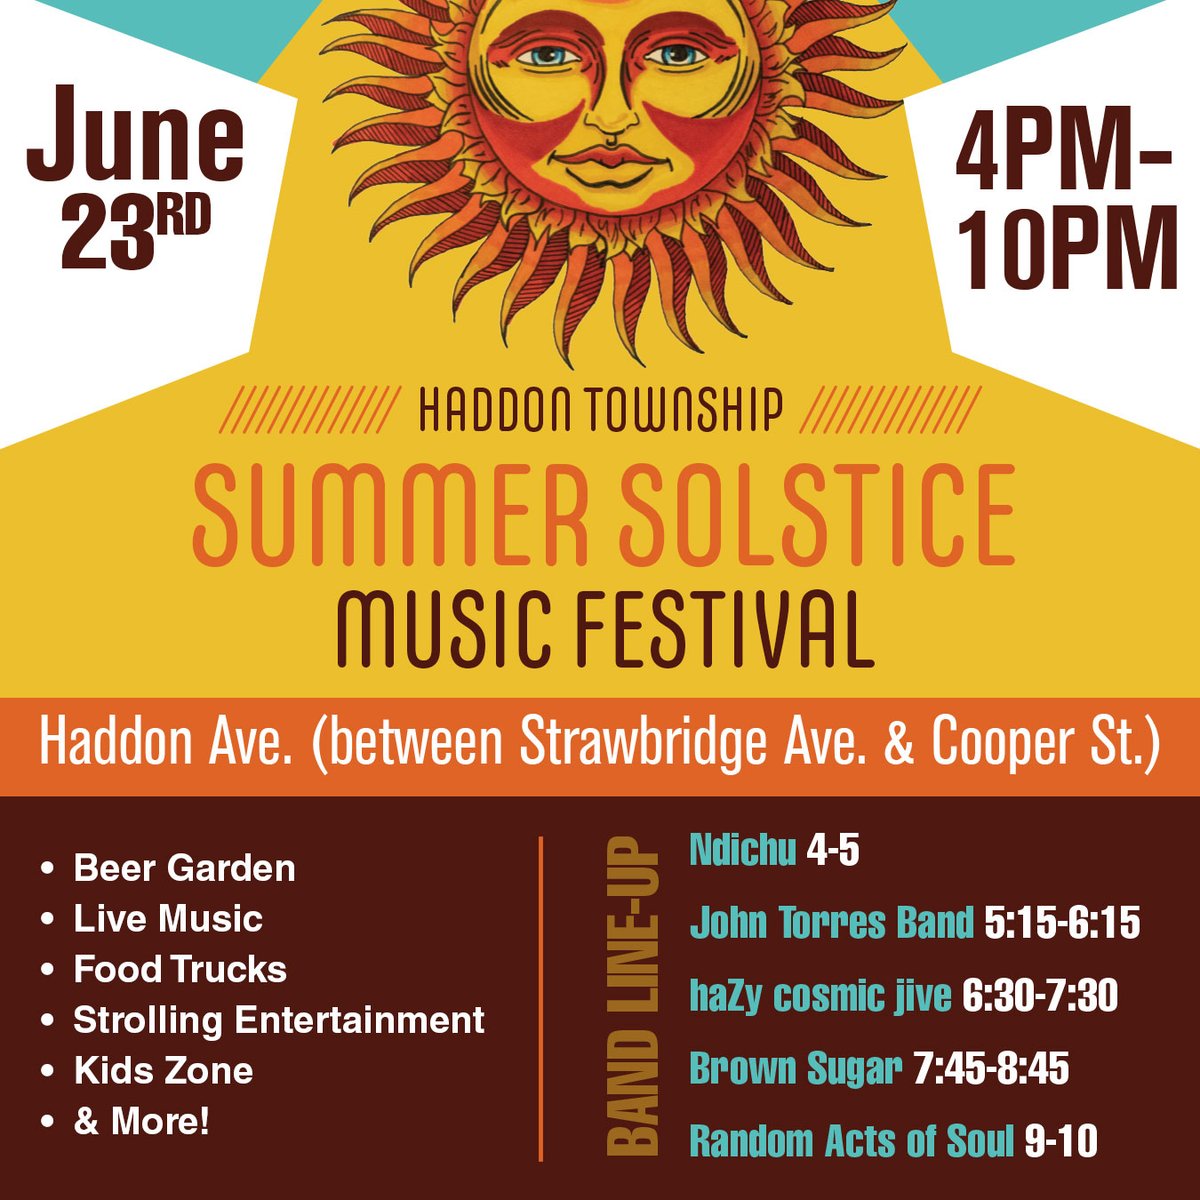 Our Summer Solstice Music Festival is just a WEEK AWAY! Join us along Haddon Avenue from 4-10 p.m. and kick-off Summer with rides, beer garden, bands, strolling performers, food trucks and more! #HaddonTwp #SummerSolstice